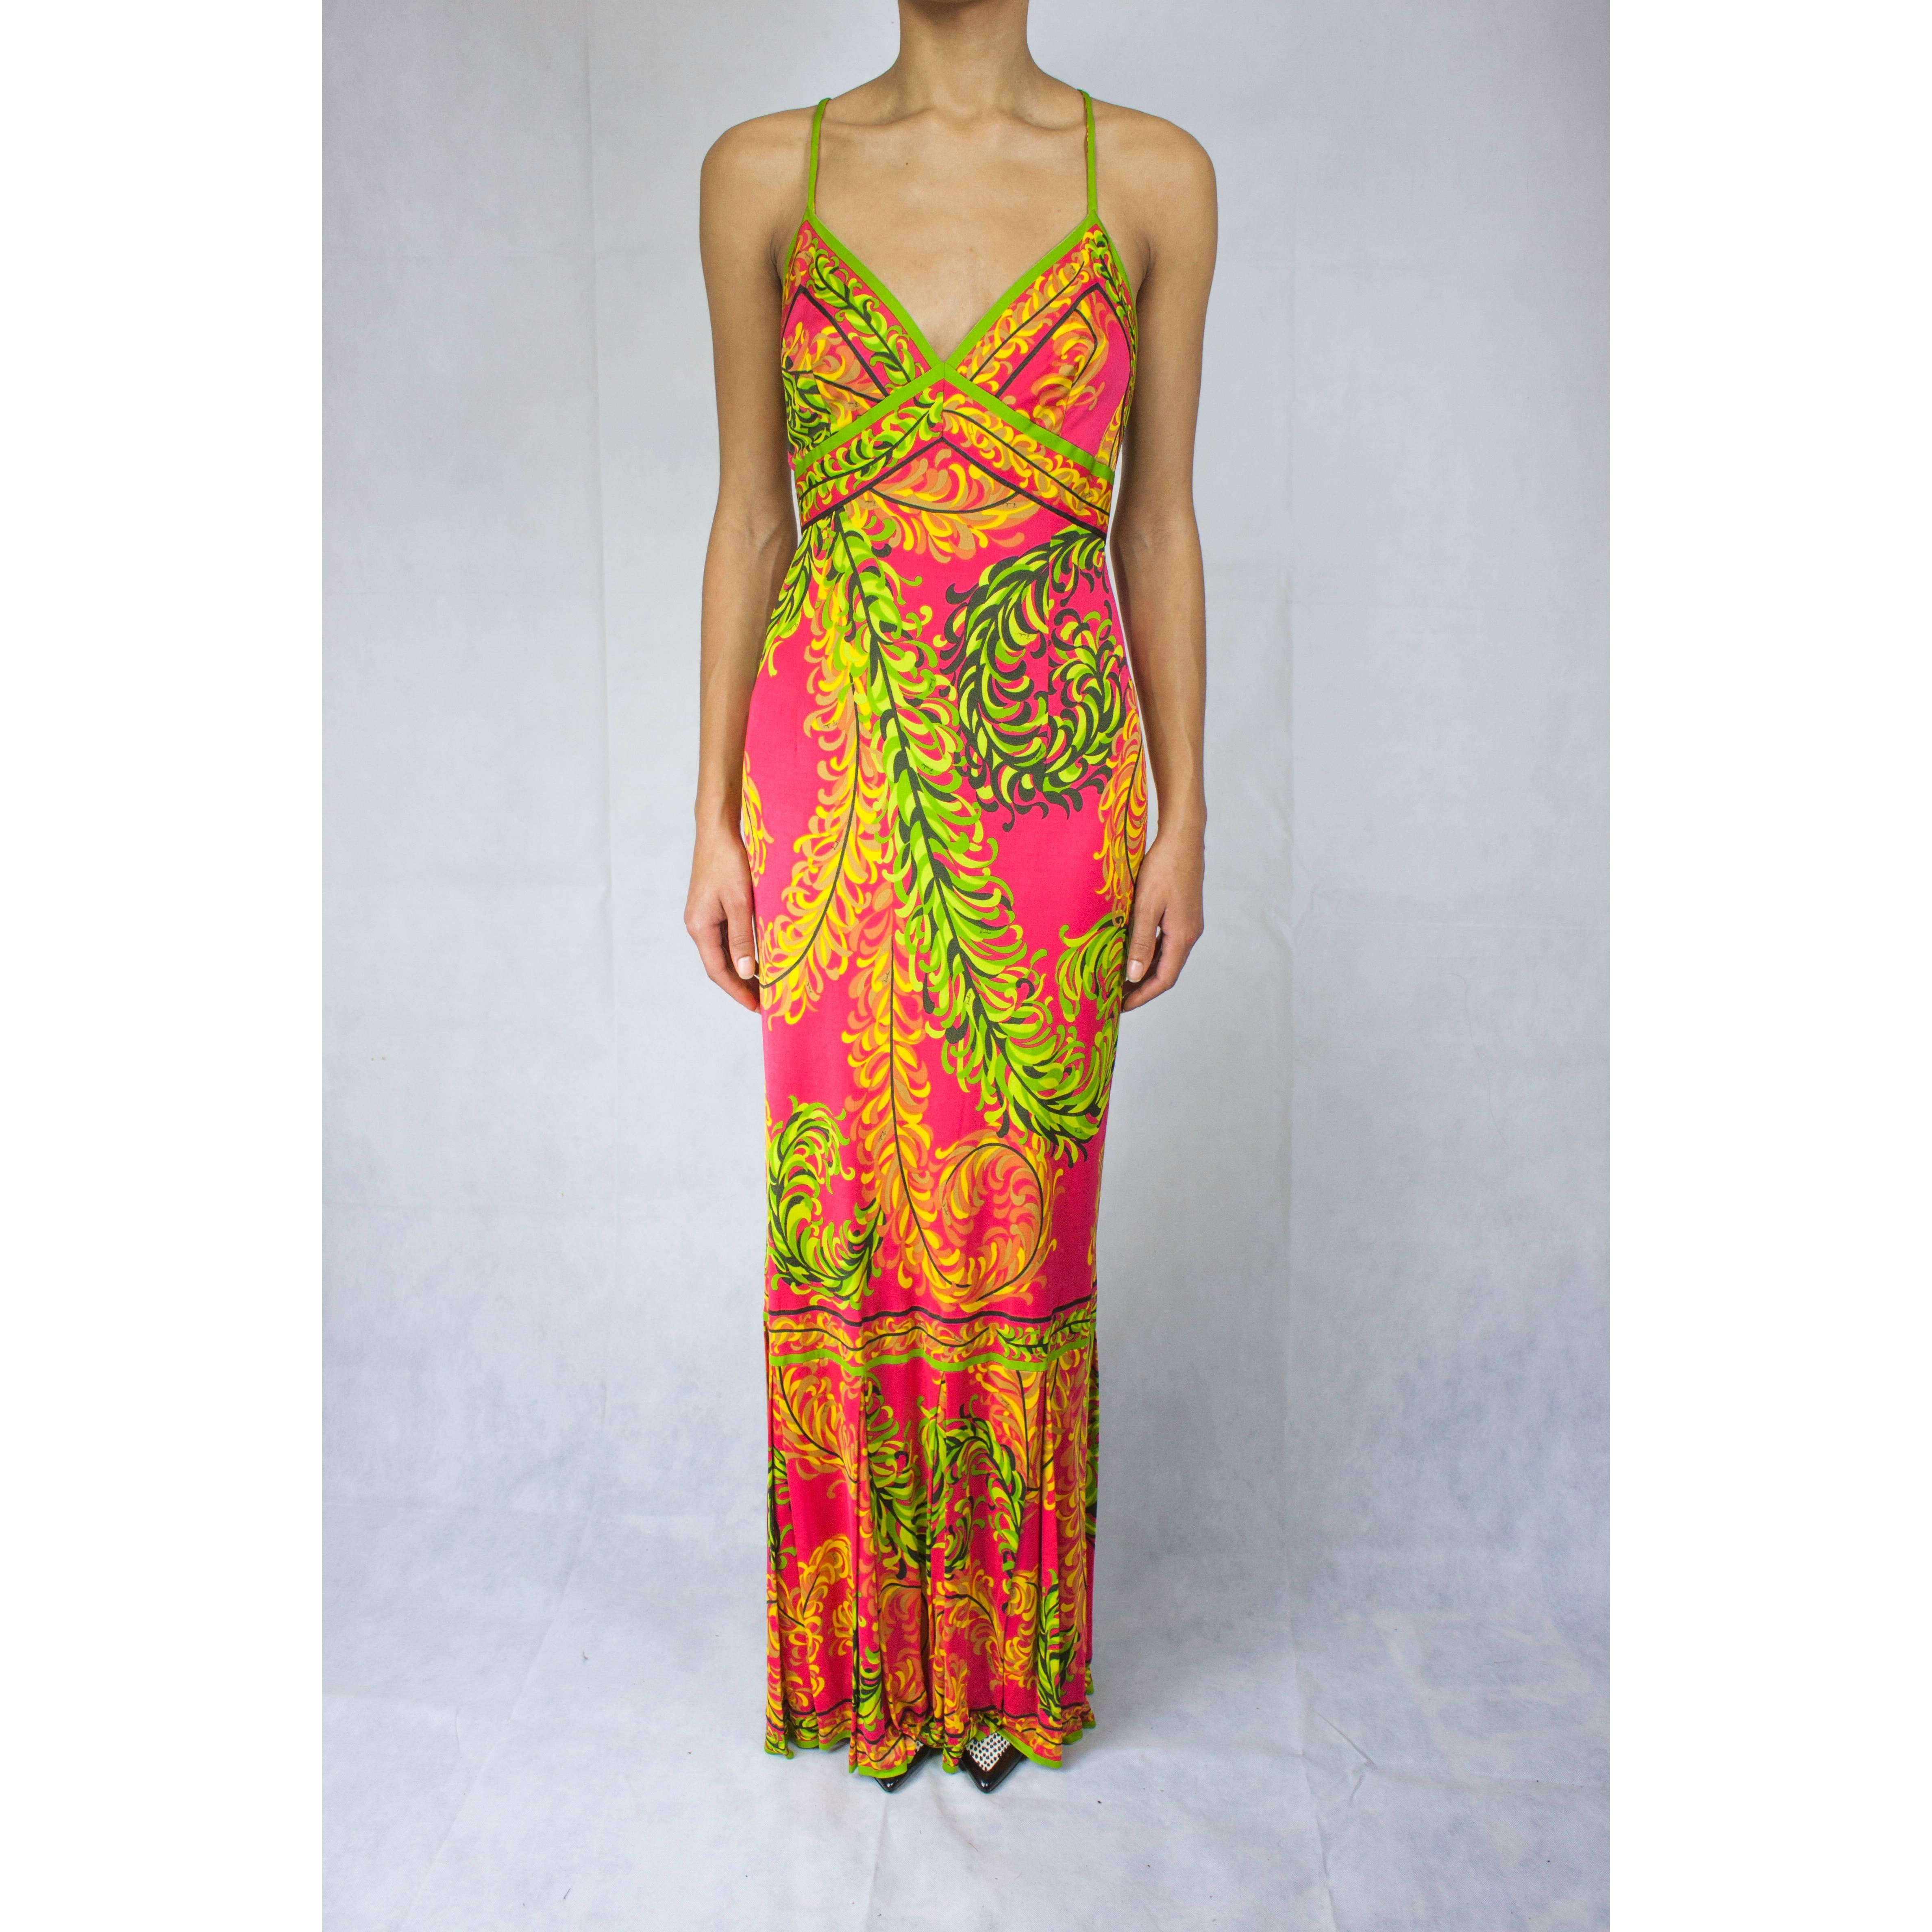 
Everything pertaining to Italian fabrics were consistently of high quality. 
And this is true of the material Emilio Pucci used to create this marvellous silk design.
This extraordinarily sensual silk jersey dress epitomises the bold Italian look